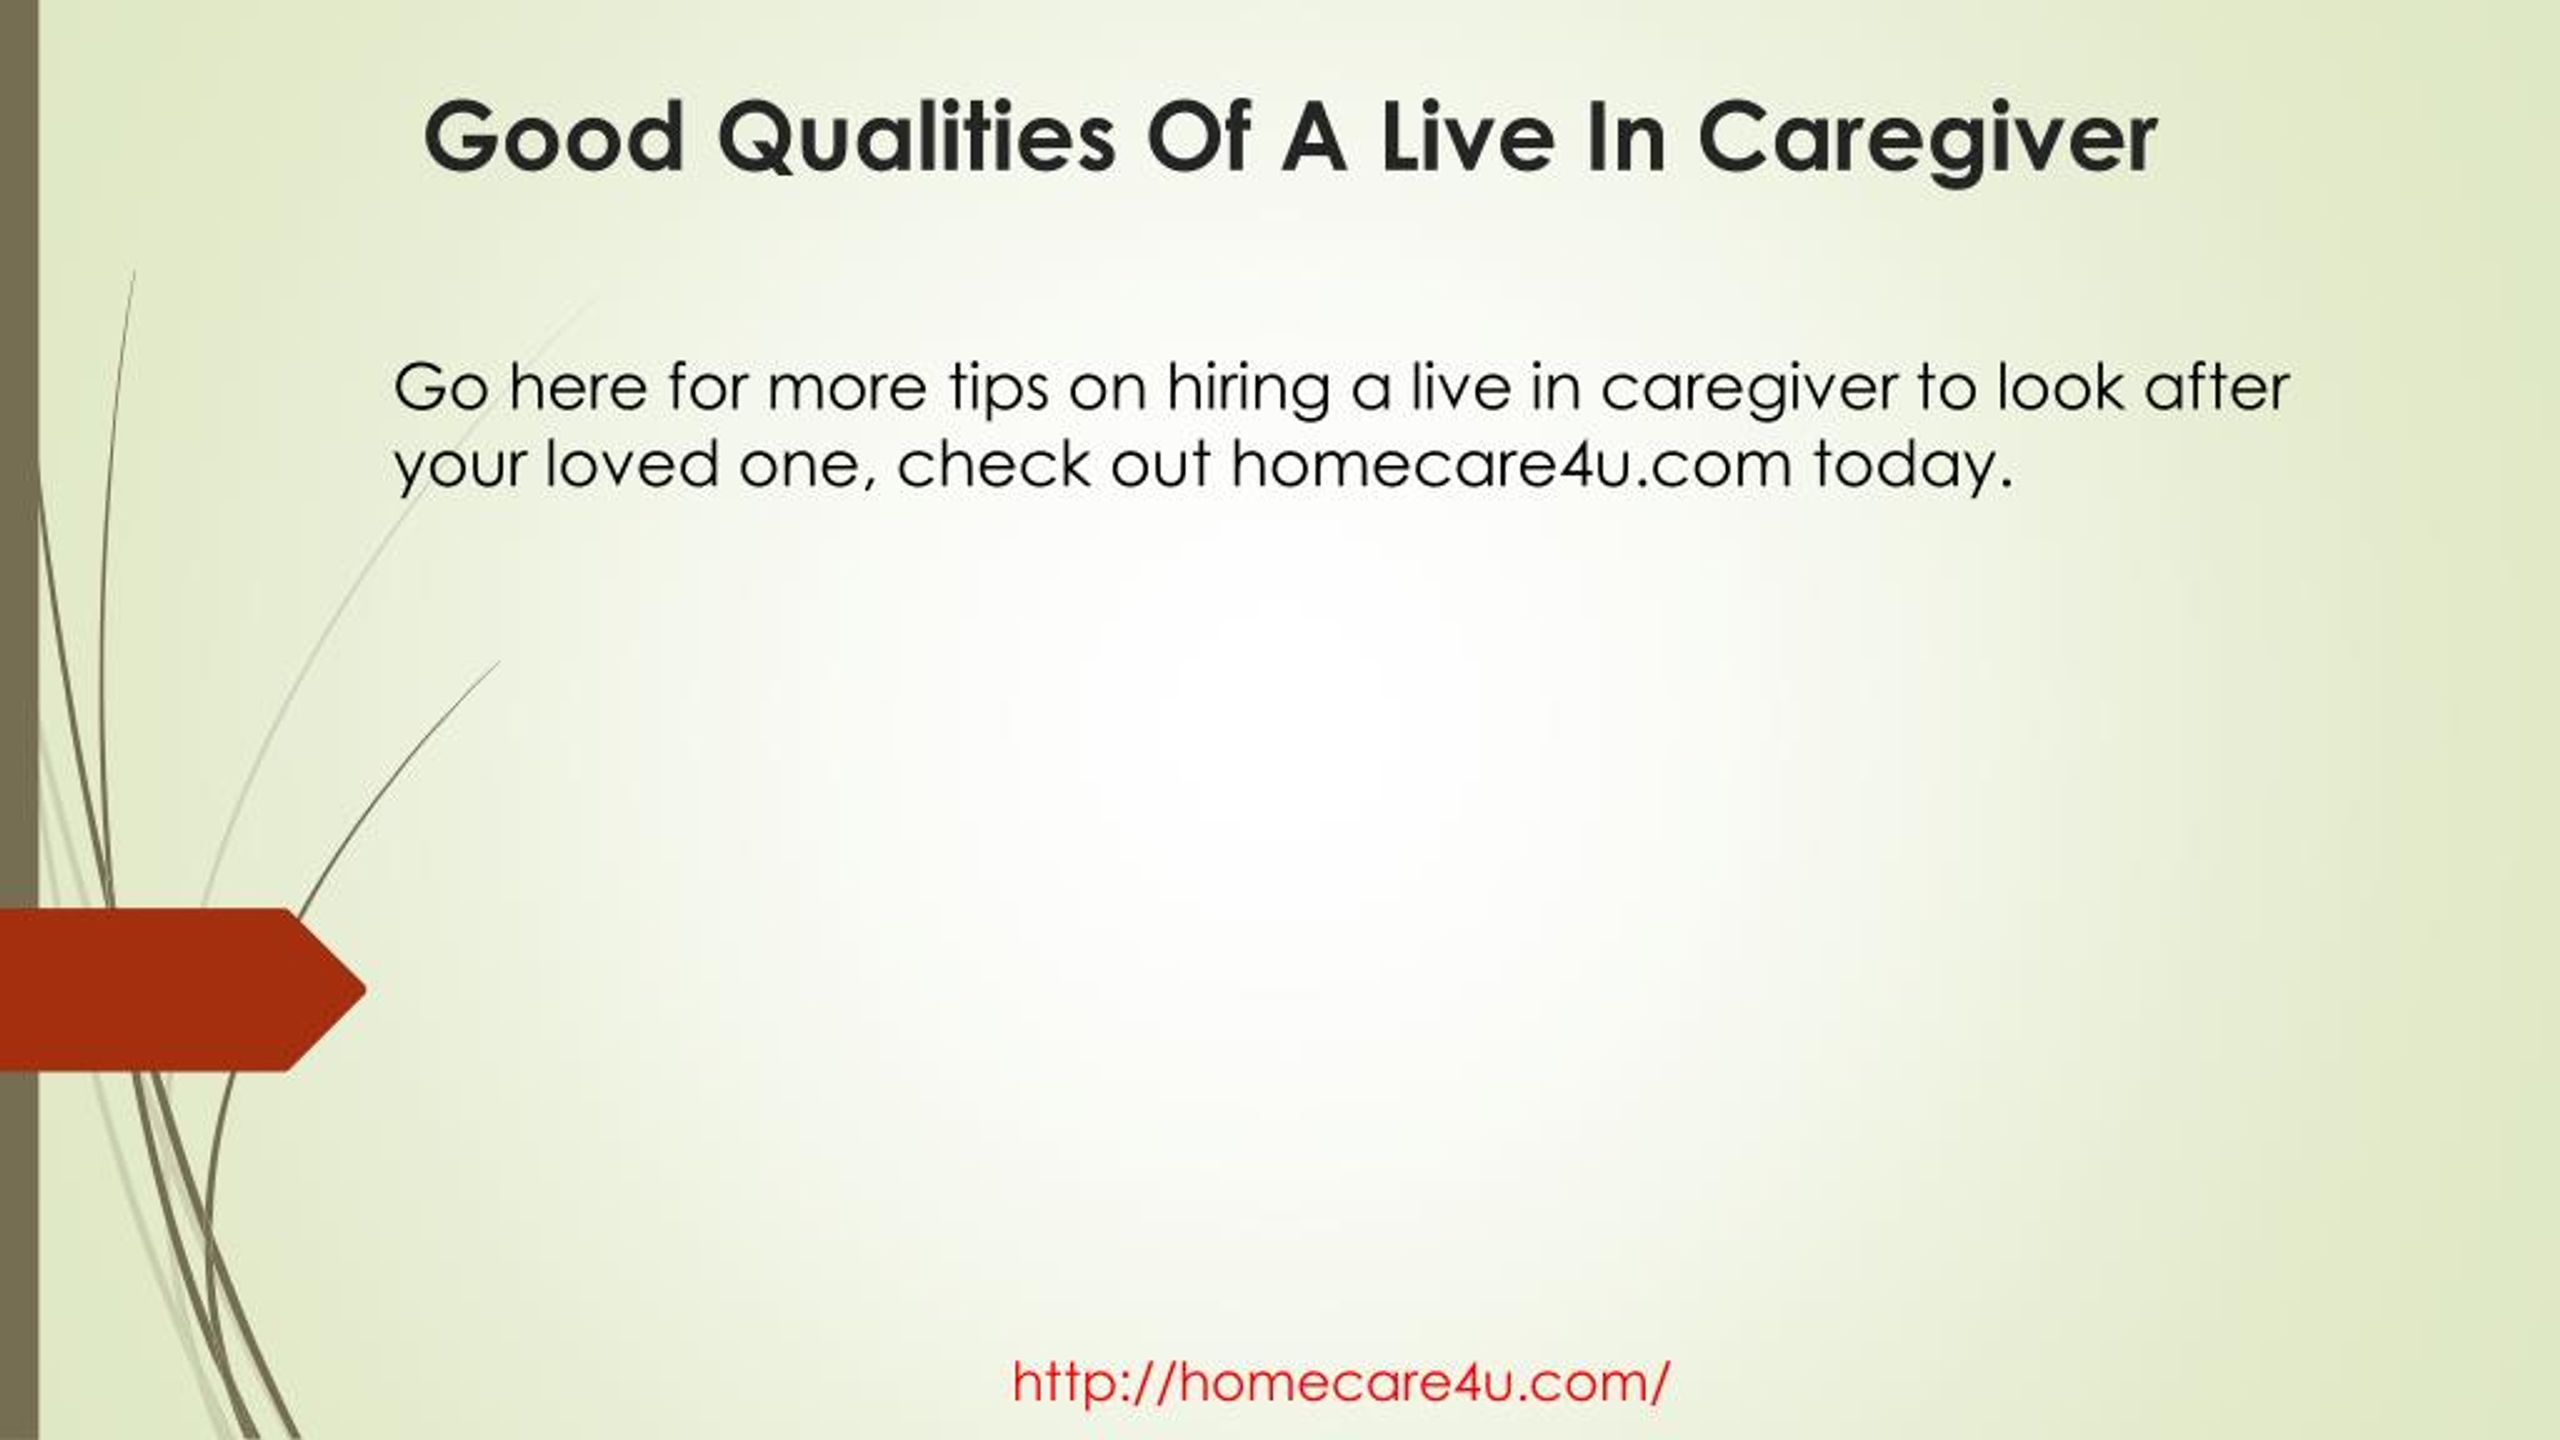 Ppt Good Qualities Of A Live In Caregiver Powerpoint Presentation